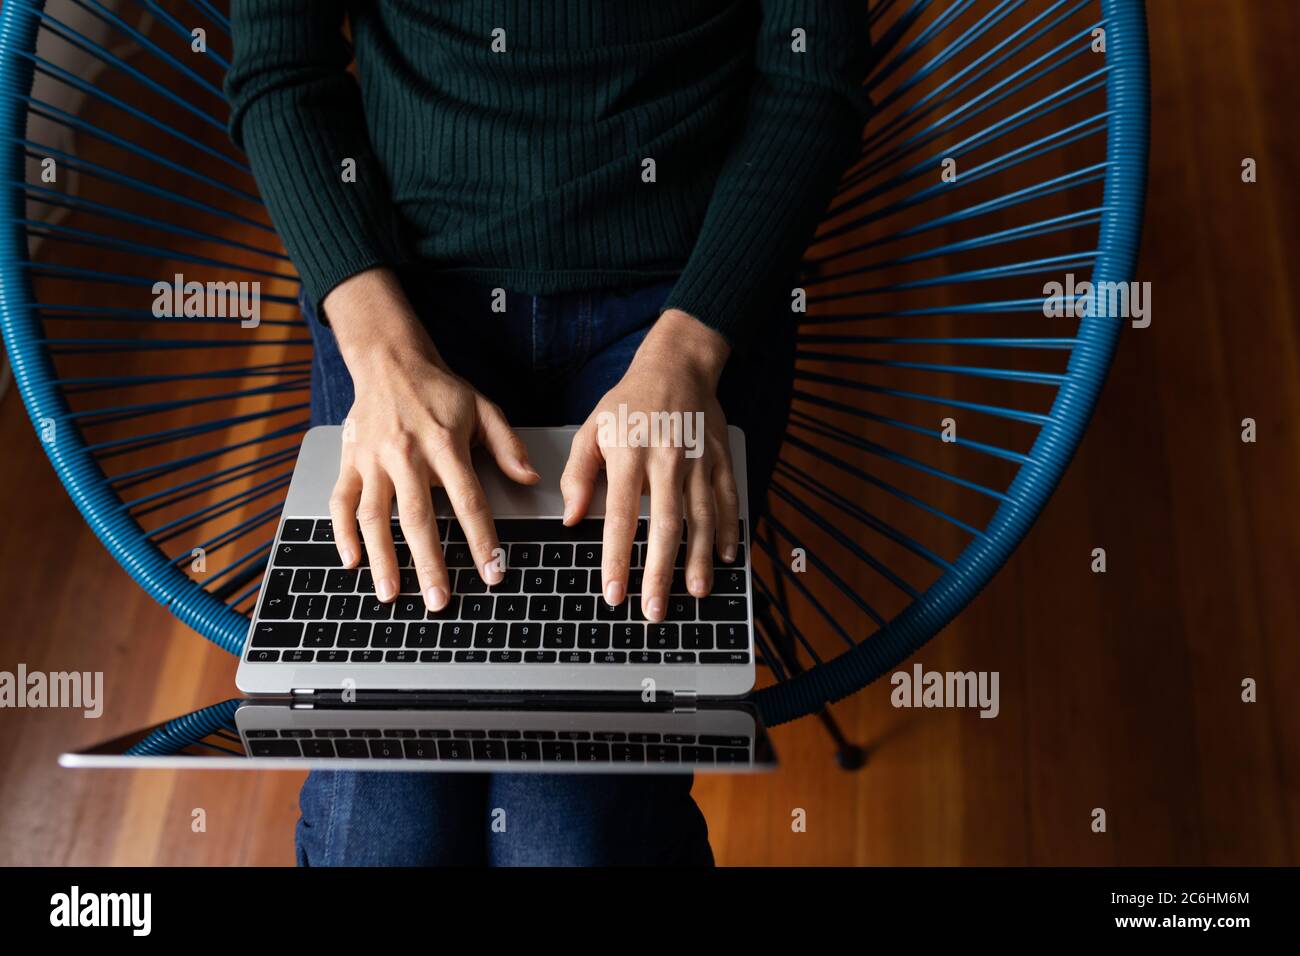 Mid section of woman using laptop sitting on a chair Stock Photo